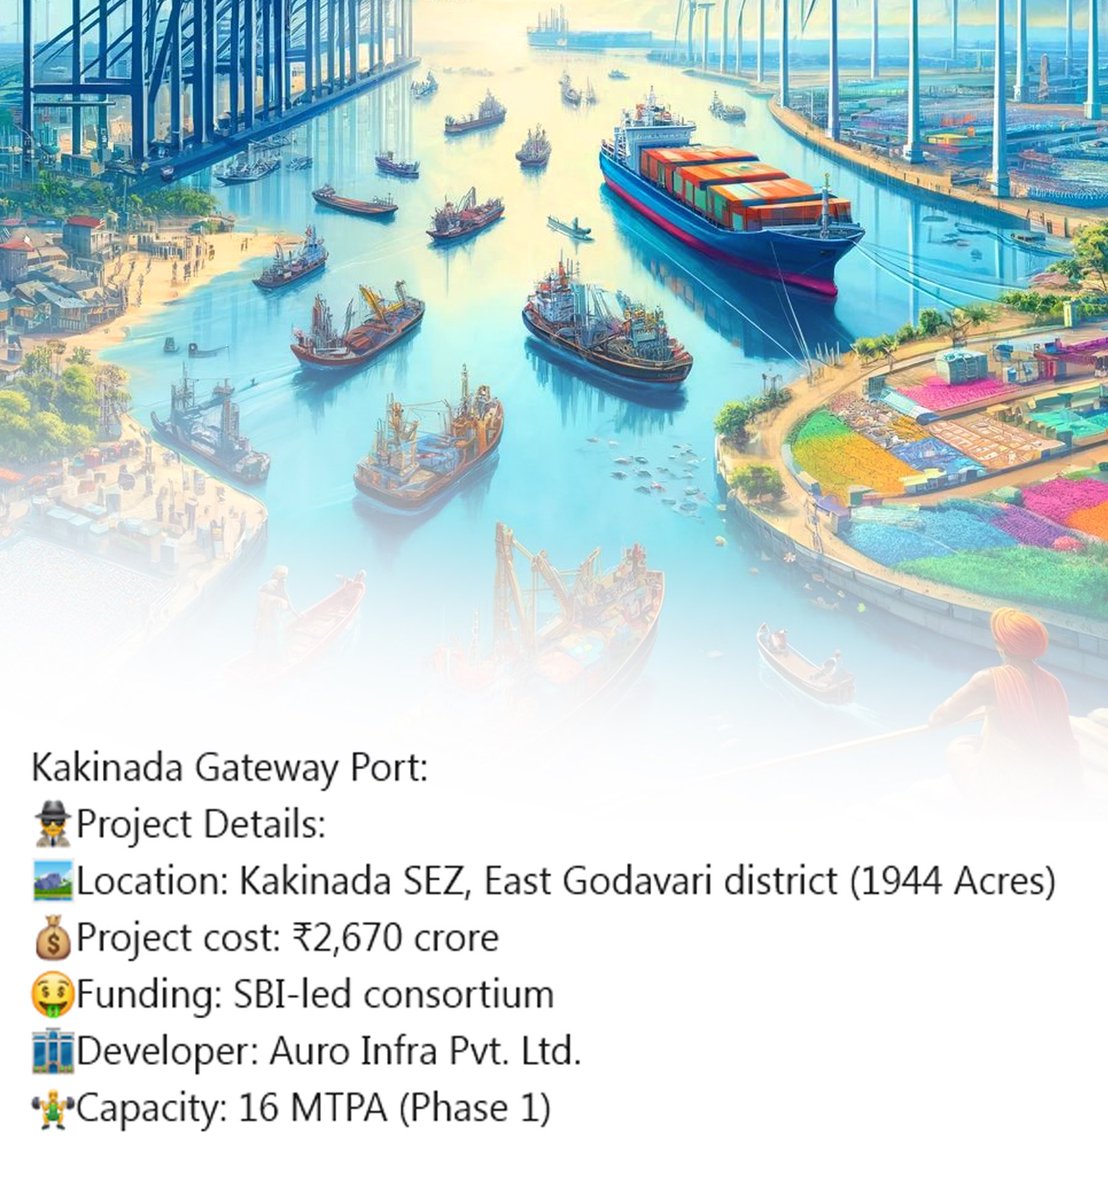 5/16 Kakinada Gateway Port: (2)
📊Impact on Blue Economy and State's Prosperity
🏭Industries: Export-oriented industries (textiles, apparel, electronics), petrochemicals, food processing, IT, ITES
📊Estimated Contribution to GSDP: ₹2,250 crore annually (First 2 Years)